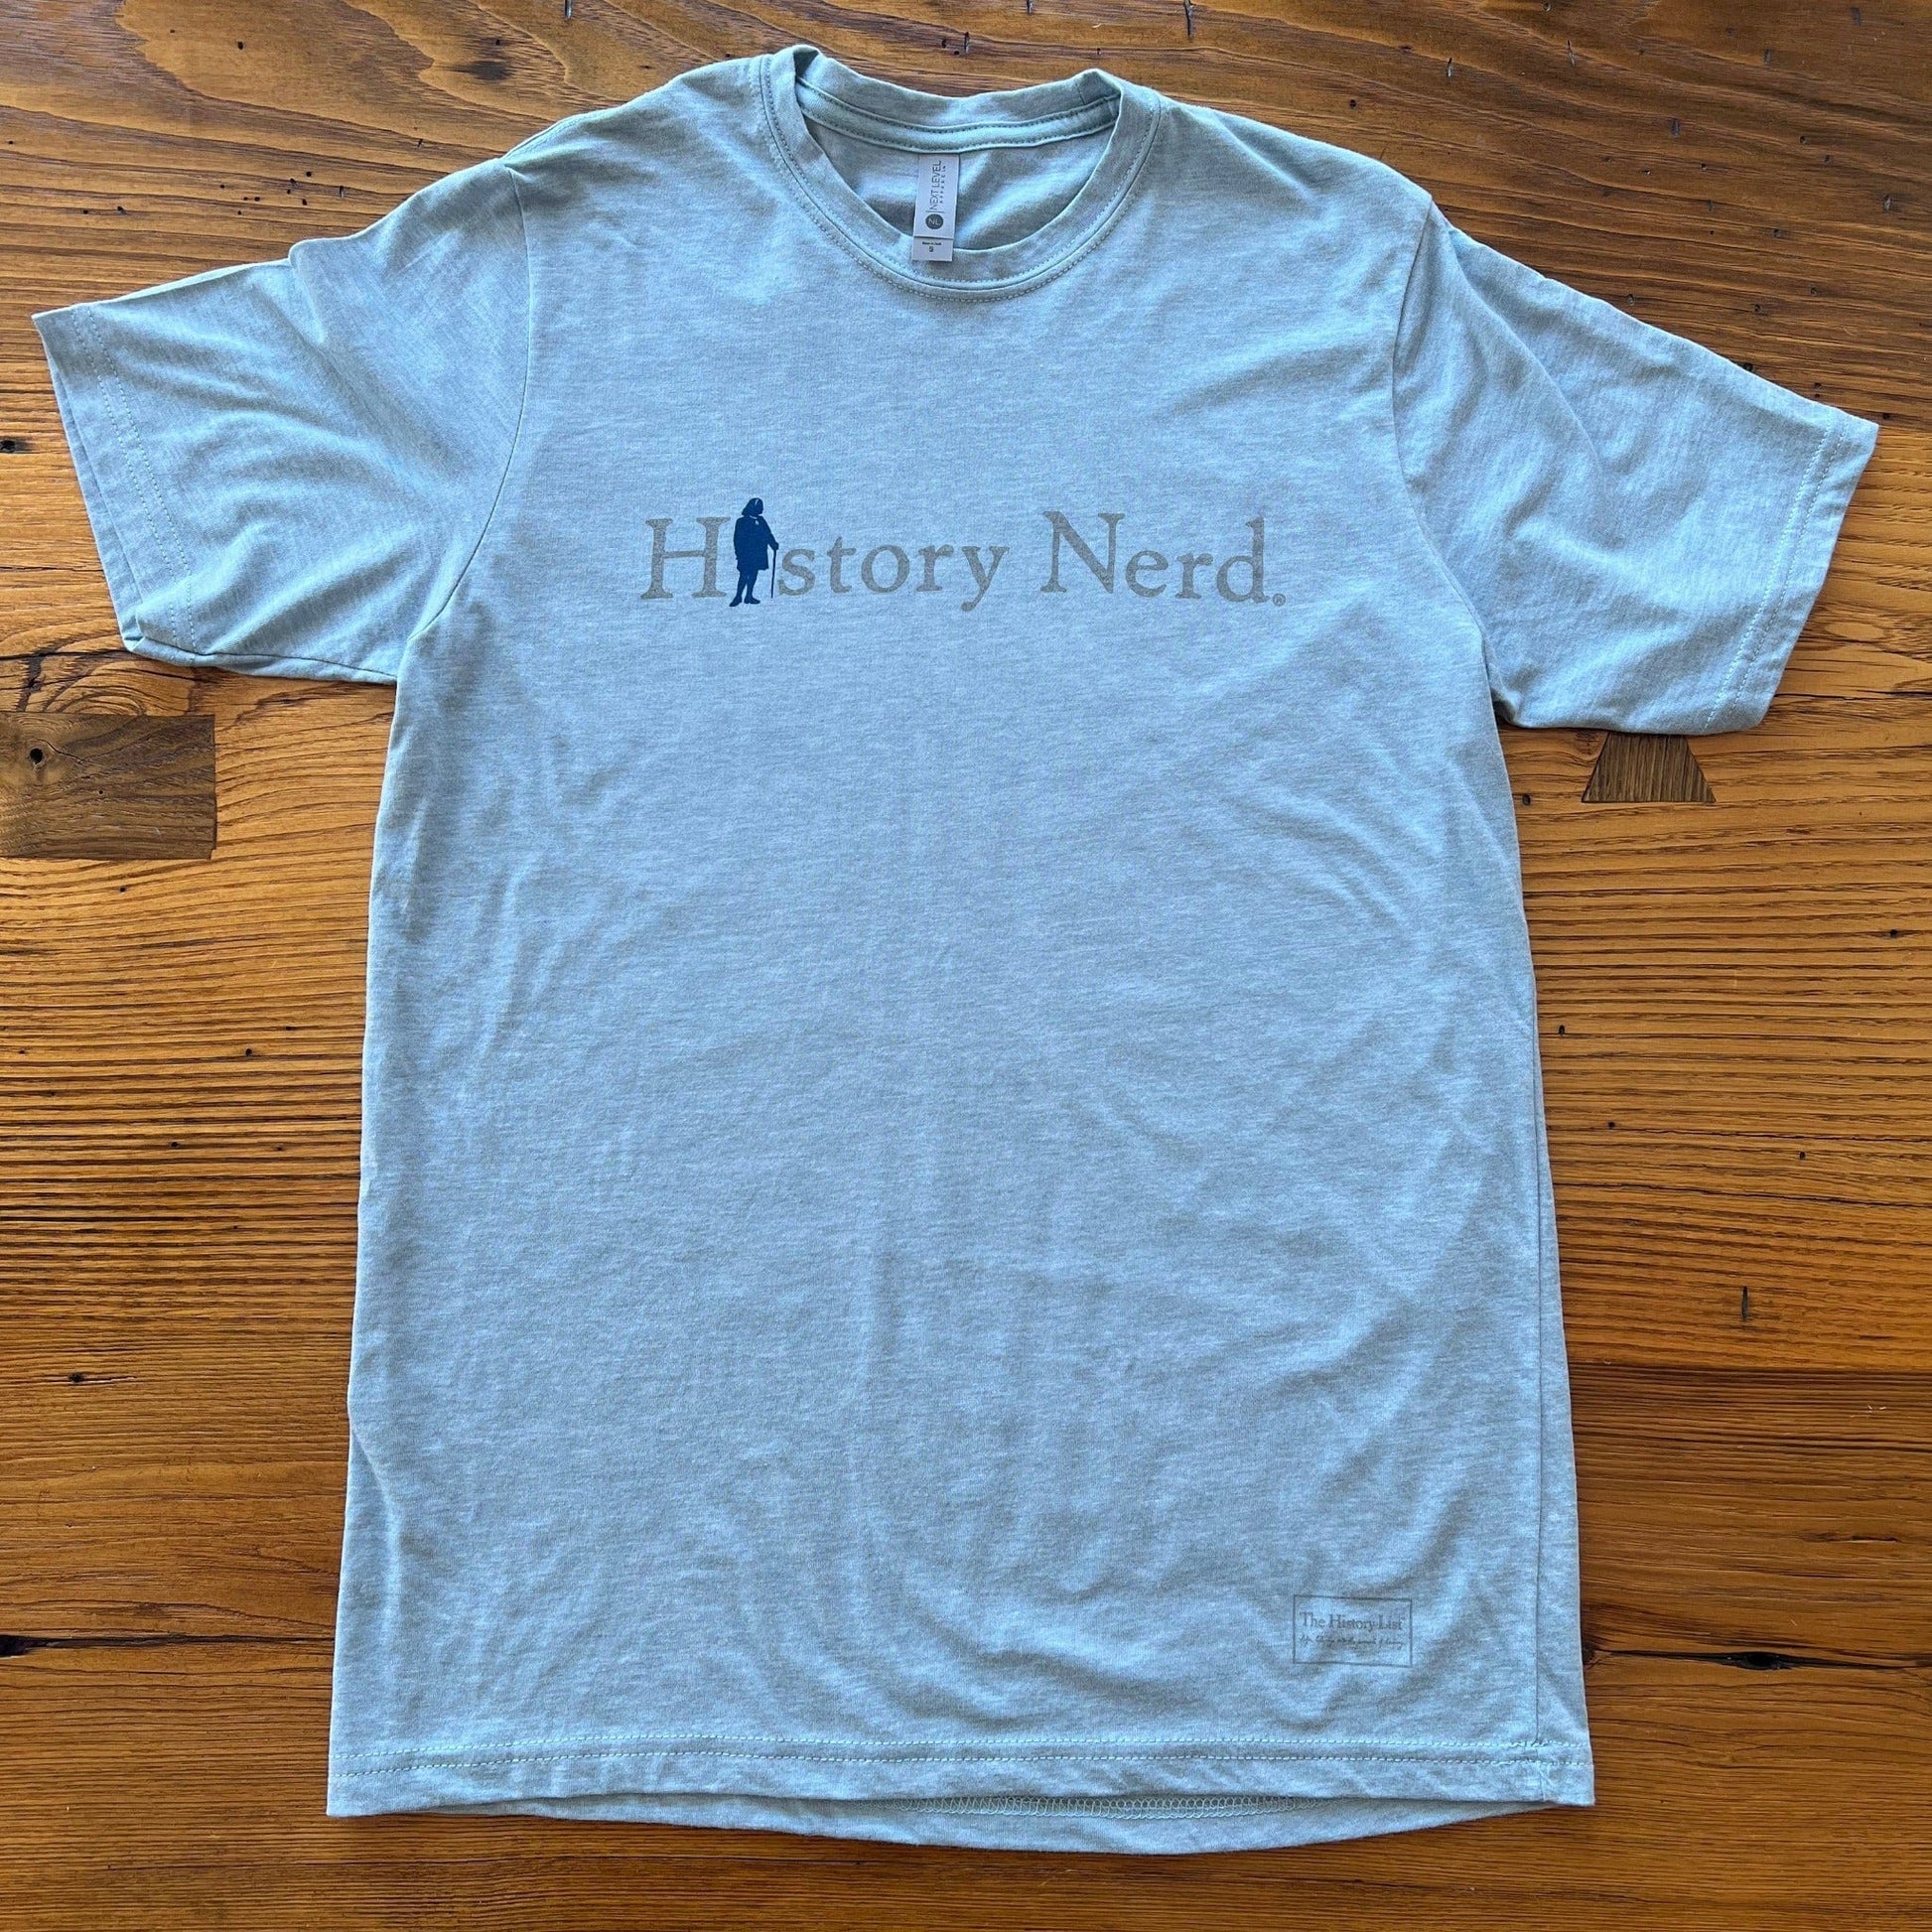 Light blue heather "History Nerd" shirt with Ben Franklin from The History List Store